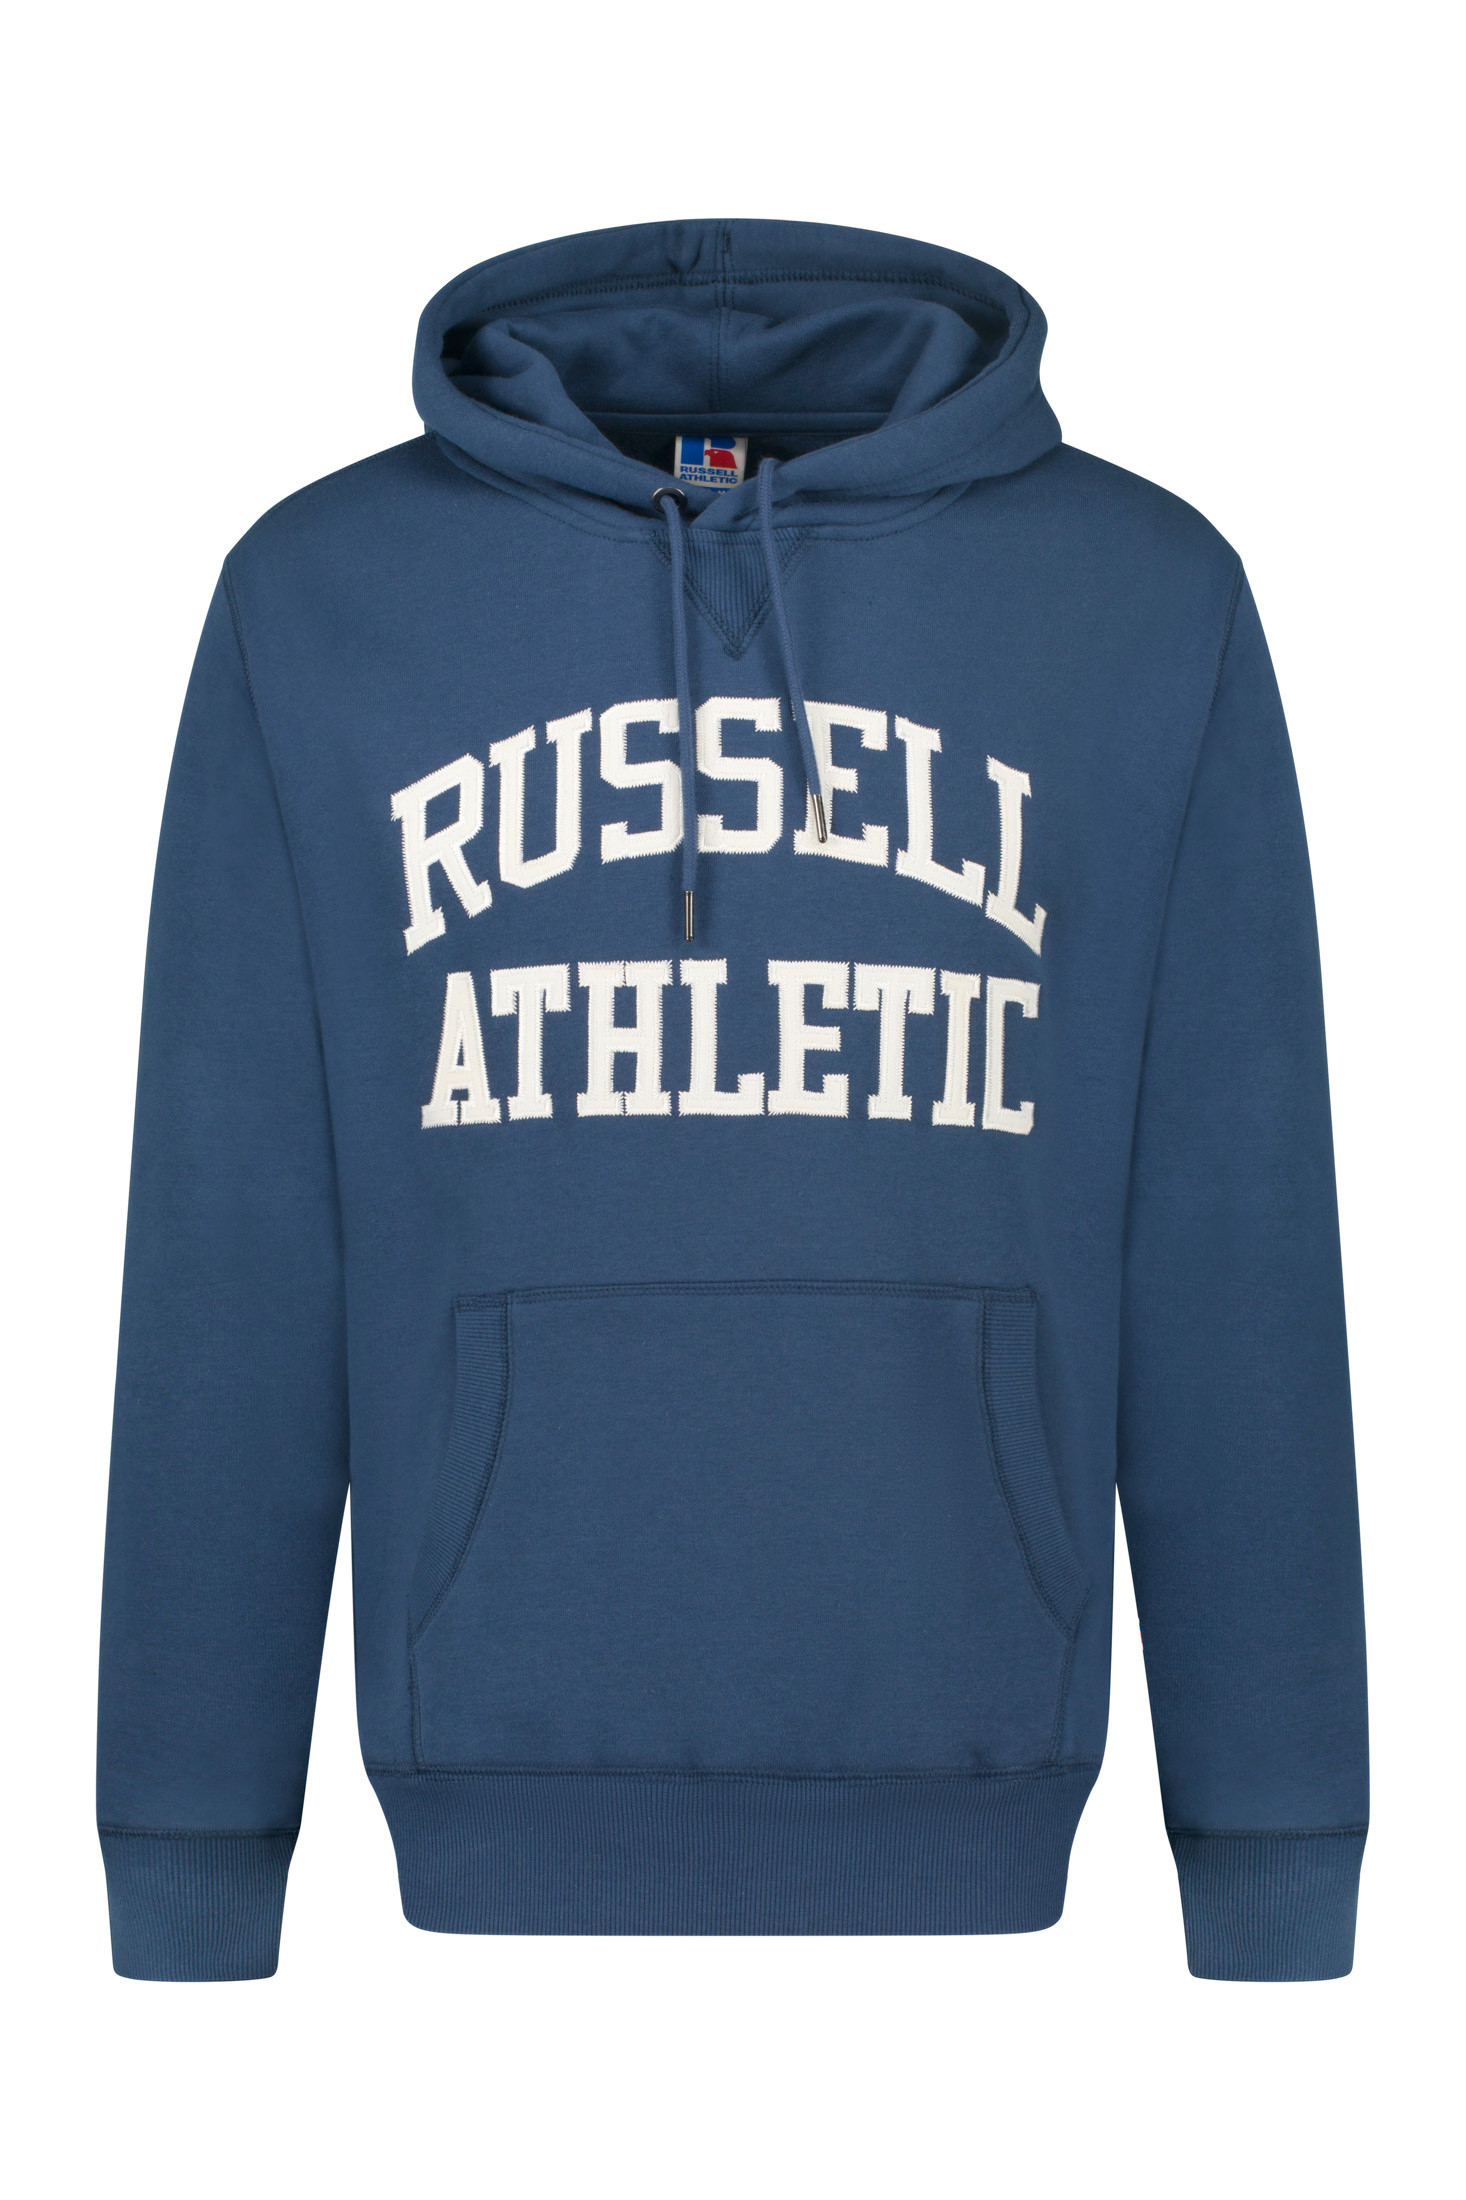 Russell Athletic - Felpa con cappuccio, Blu, large image number 0